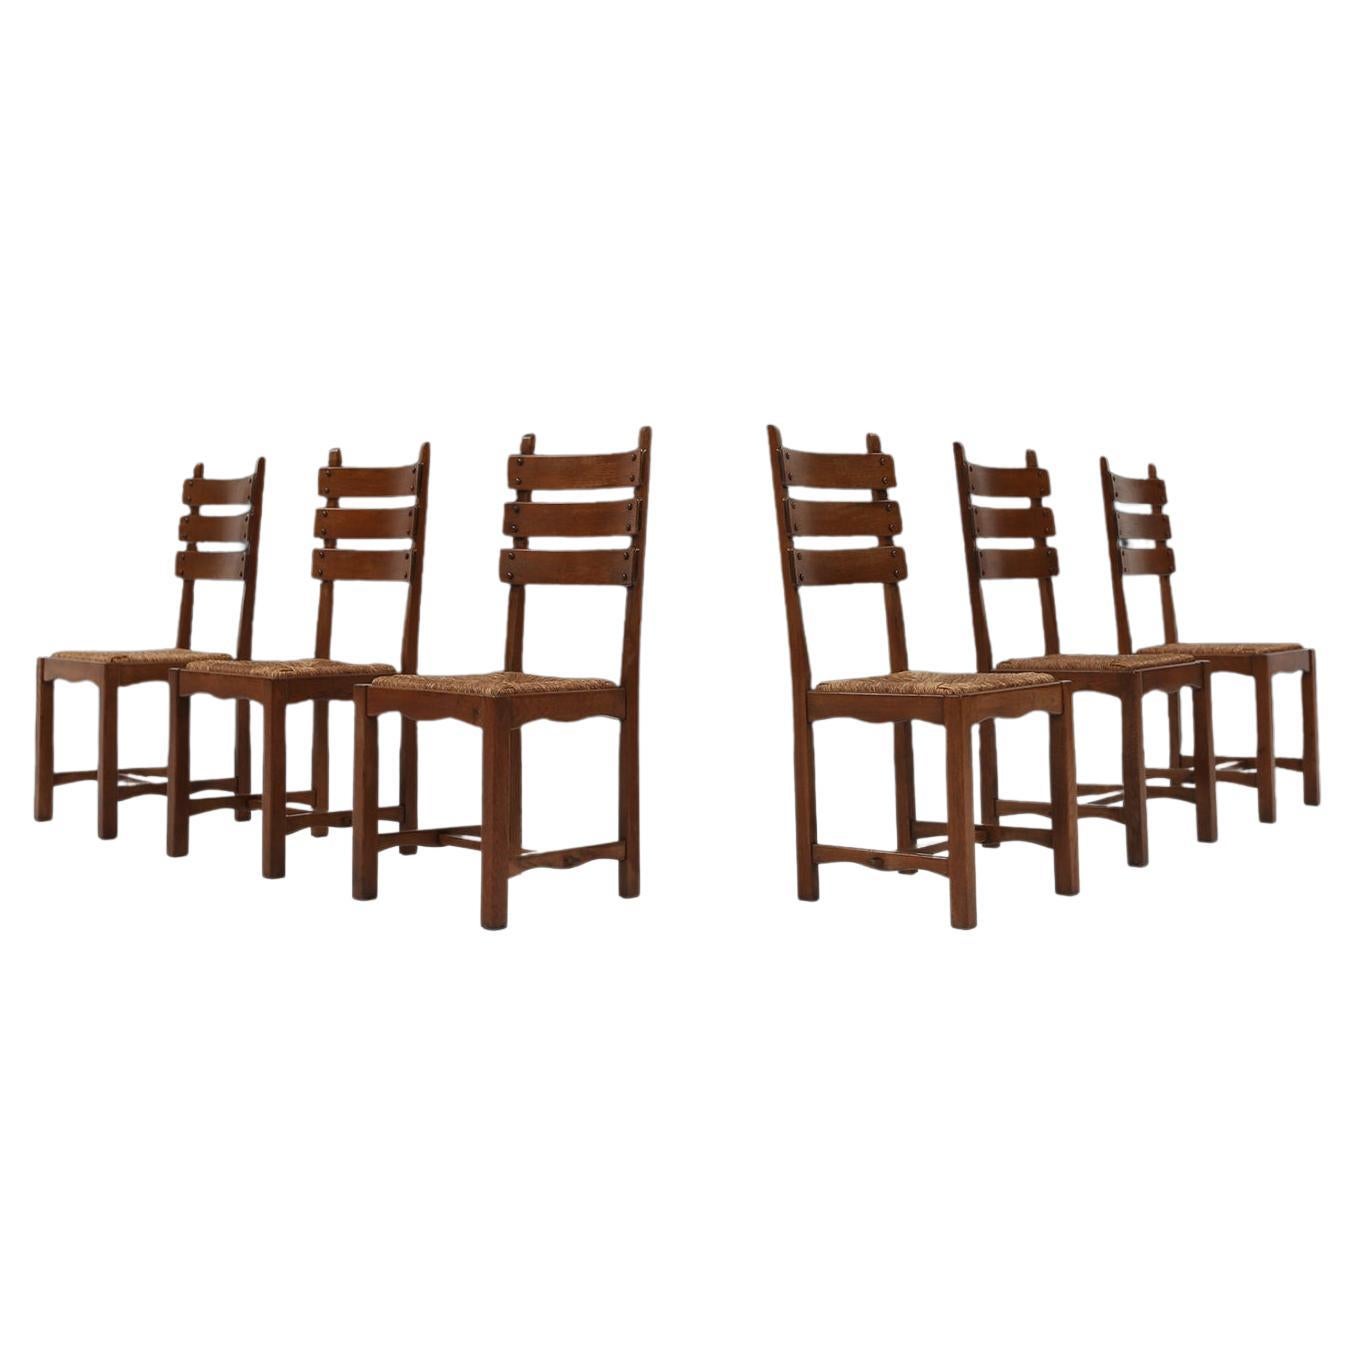 Set of Six Brutalist Dining Chairs in Oak an Wicker For Sale